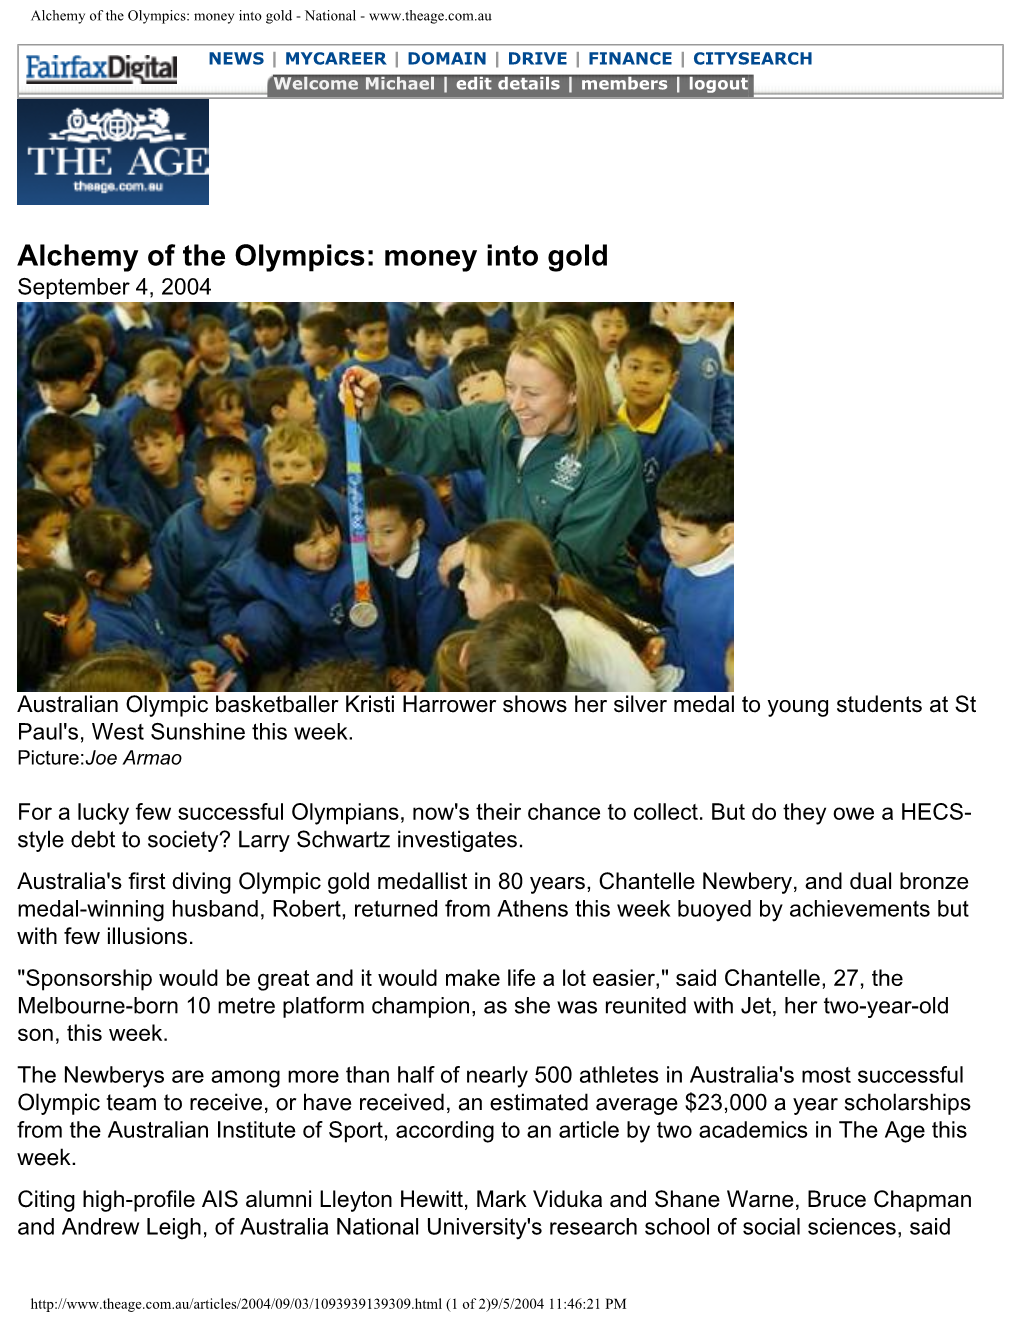 Alchemy of the Olympics: Money Into Gold - National